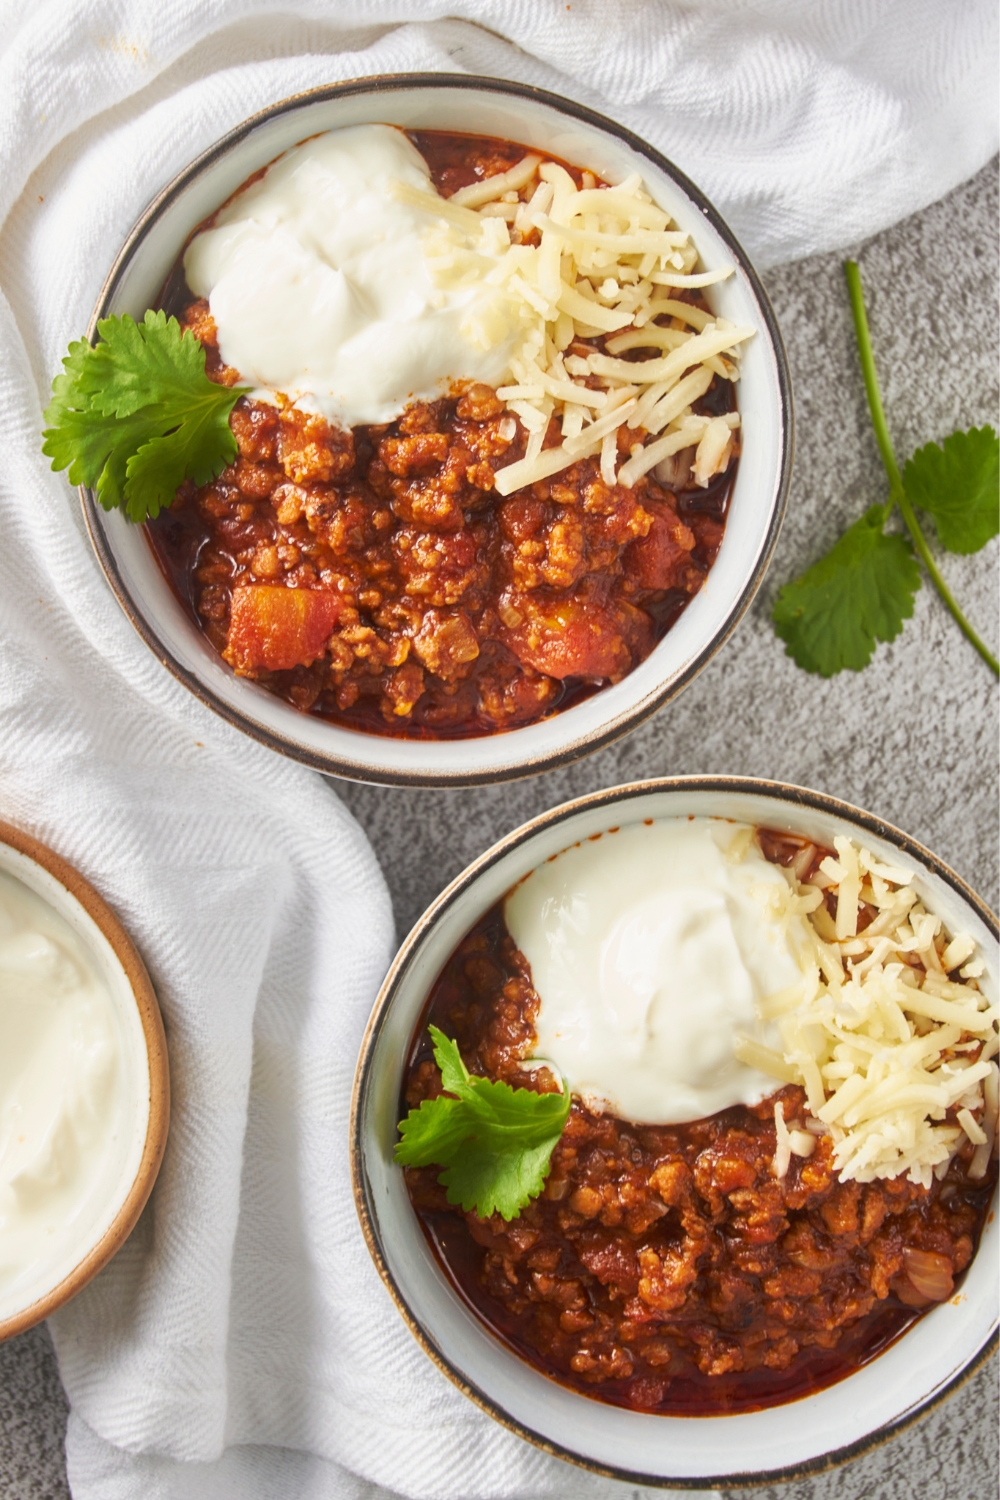 Two bowls of texas chili topped with shredded cheese and a dollop of sour cream.